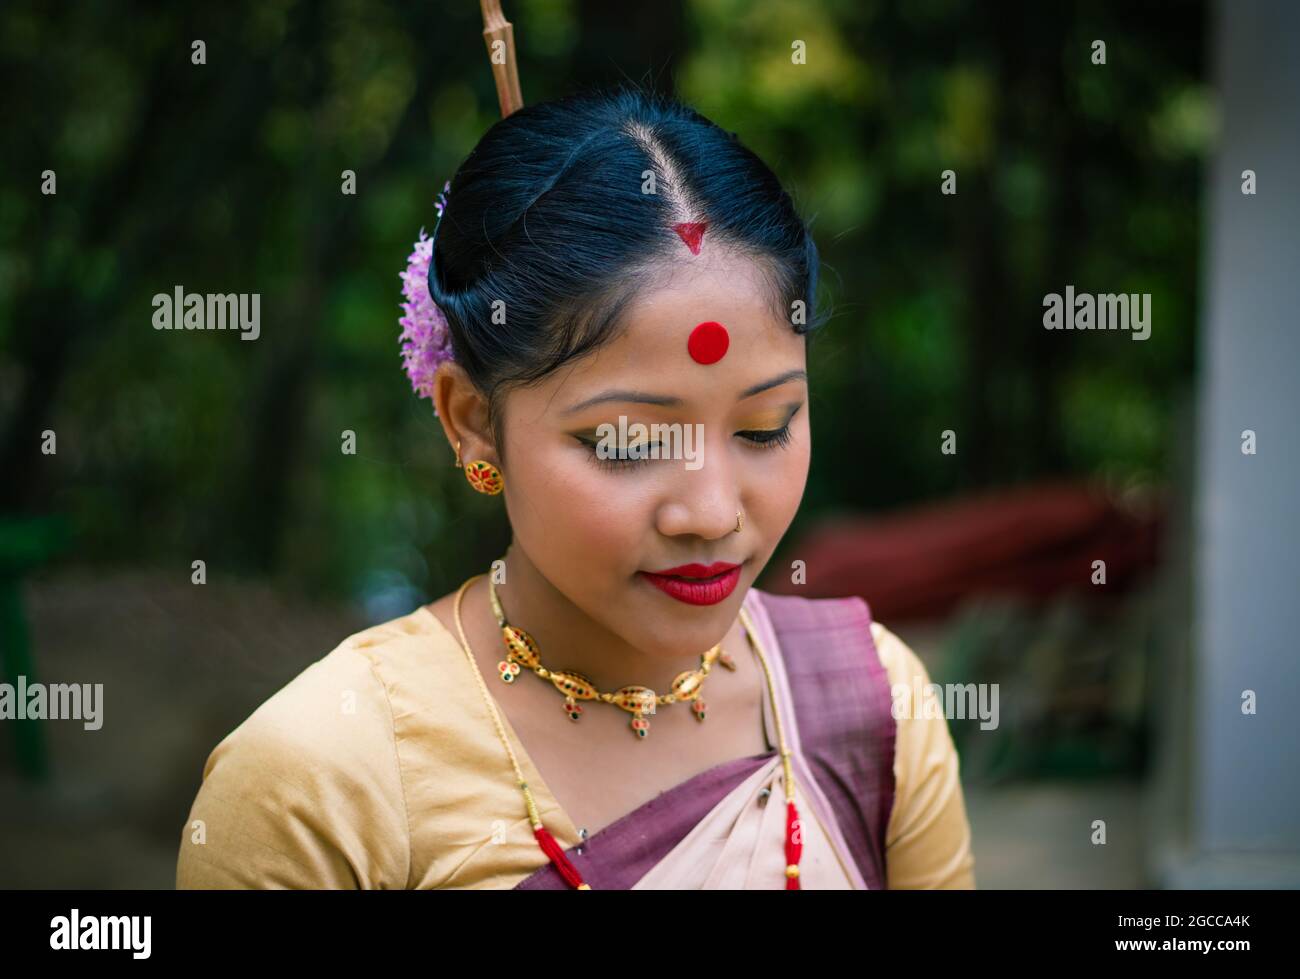 girl close up portrait isolated dressed in traditional wearing on festival with blurred background image is taken on the occasion of bihu at assam ind Stock Photo